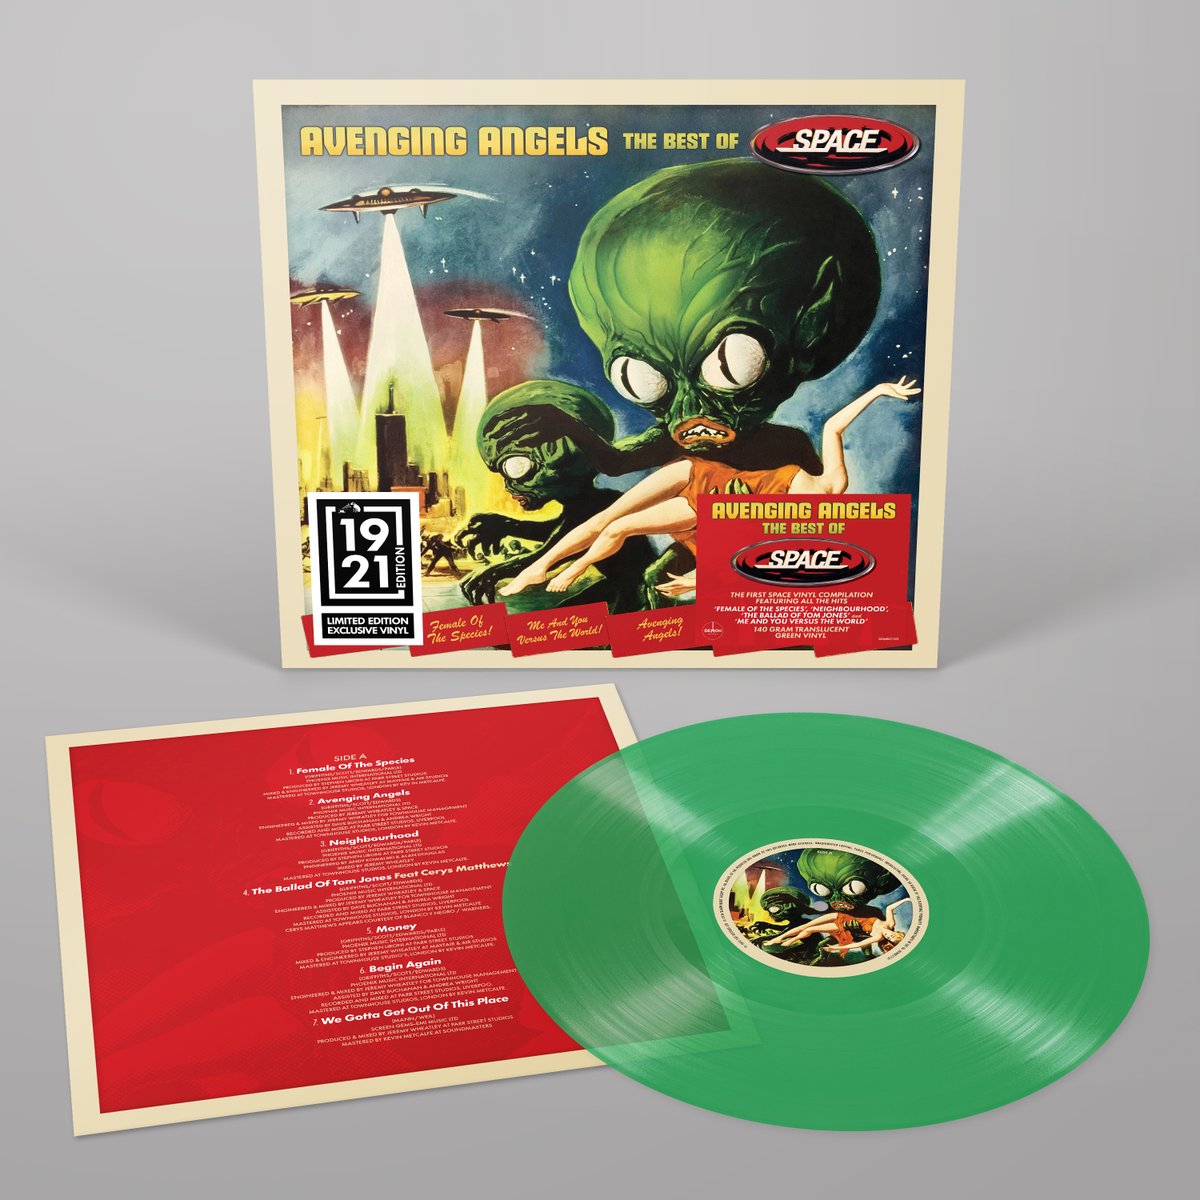 Avenging Angels: The Best of Space is the first vinyl compilation featuring all hits. Pressed on 140g translucent green vinyl, this 1921 Edition is exclusive to #hmvvinylweek and will be available in-store and online June 15. Visit the hmv website for more info. #hmvlovesvinyl